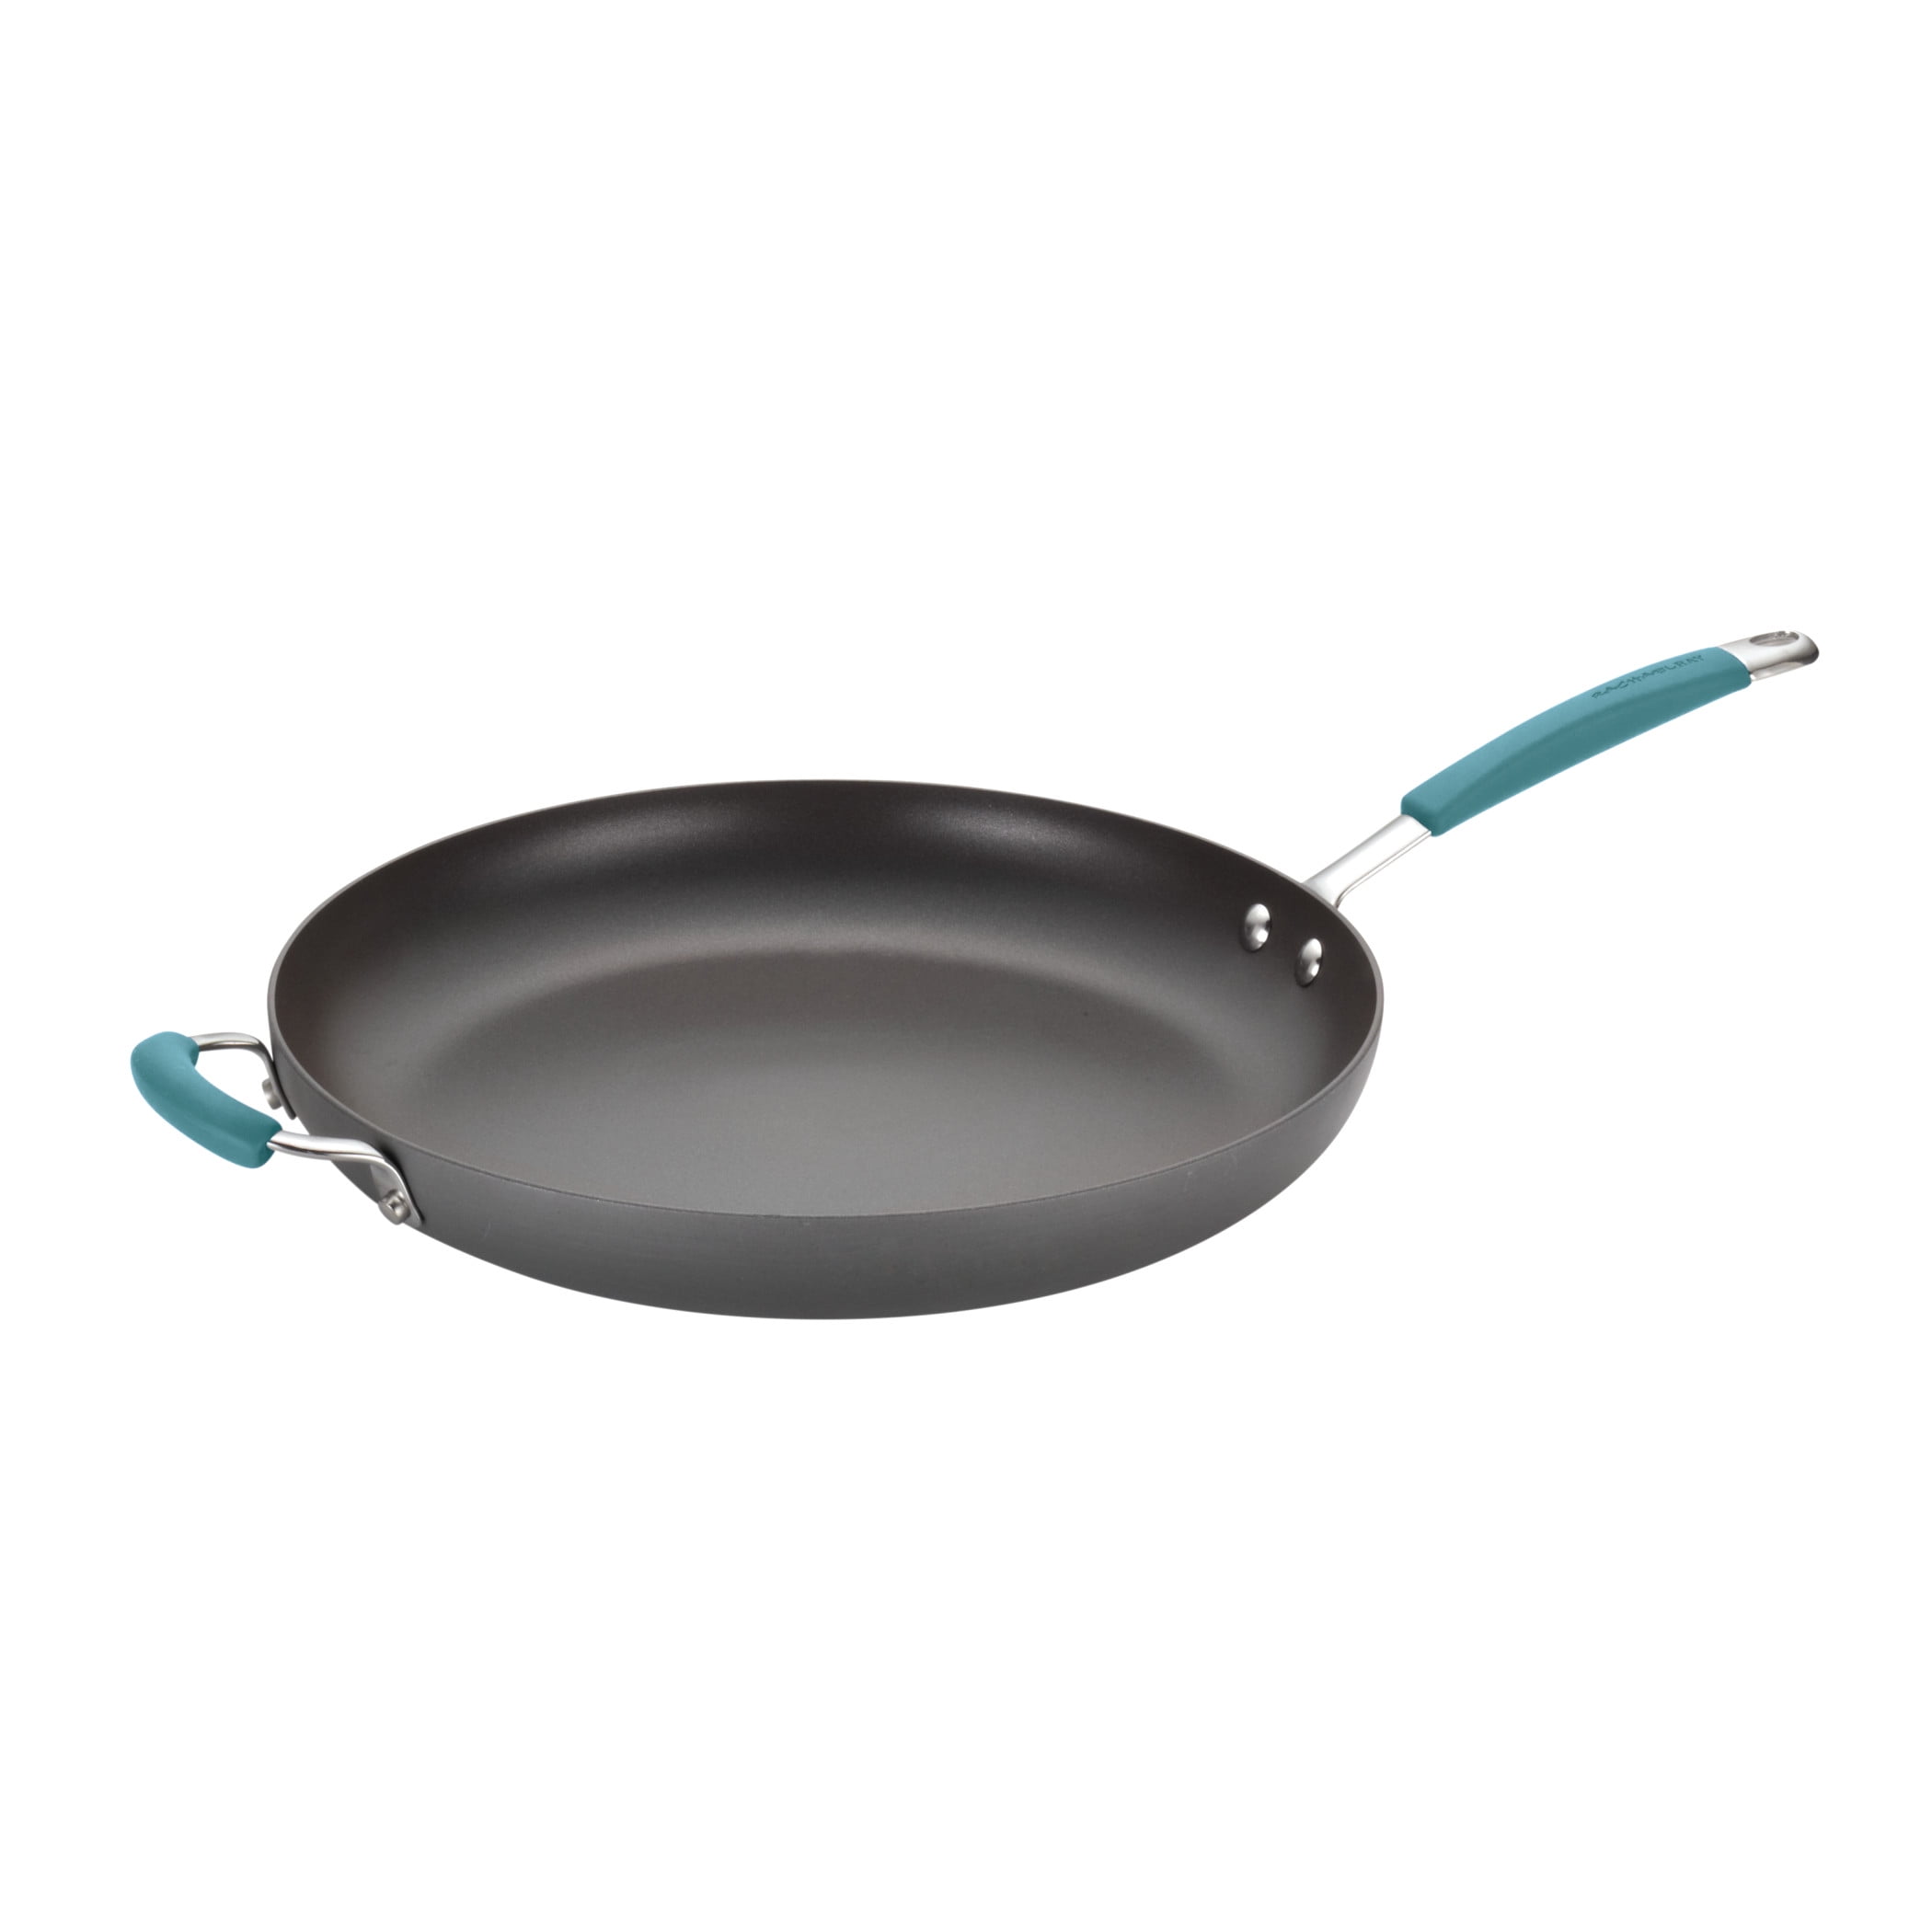 14" Frying Pan Classic Nonstick Hard Anodized Open Skillet with Helper Handle 